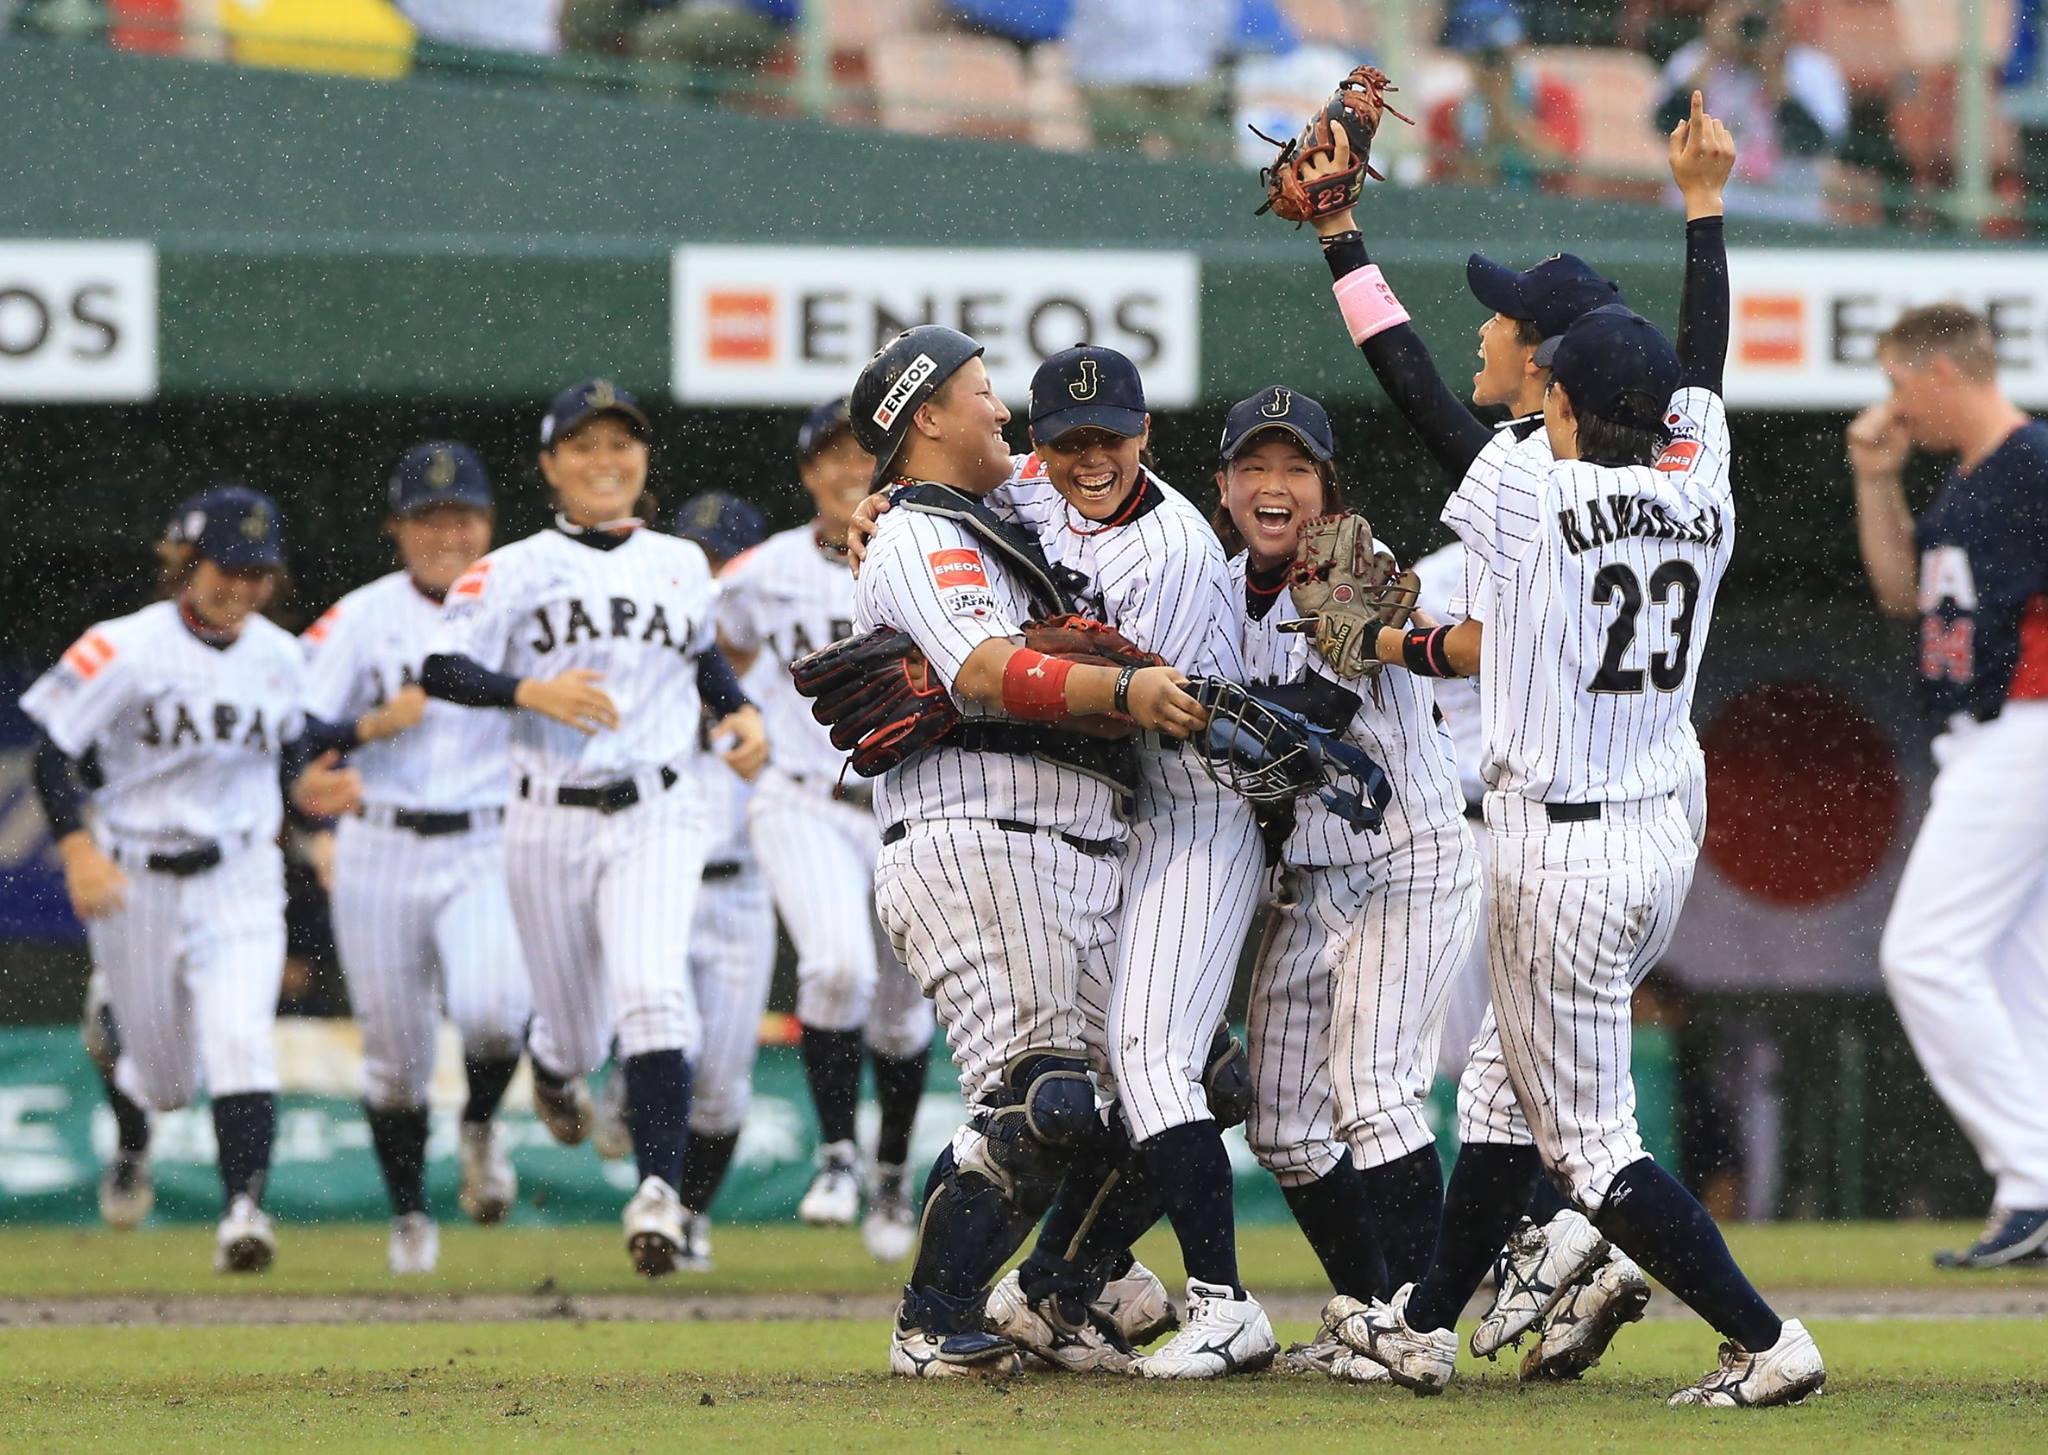 Public support for baseball and softball's inclusion at Tokyo 2020 is growing claims ©WBSC